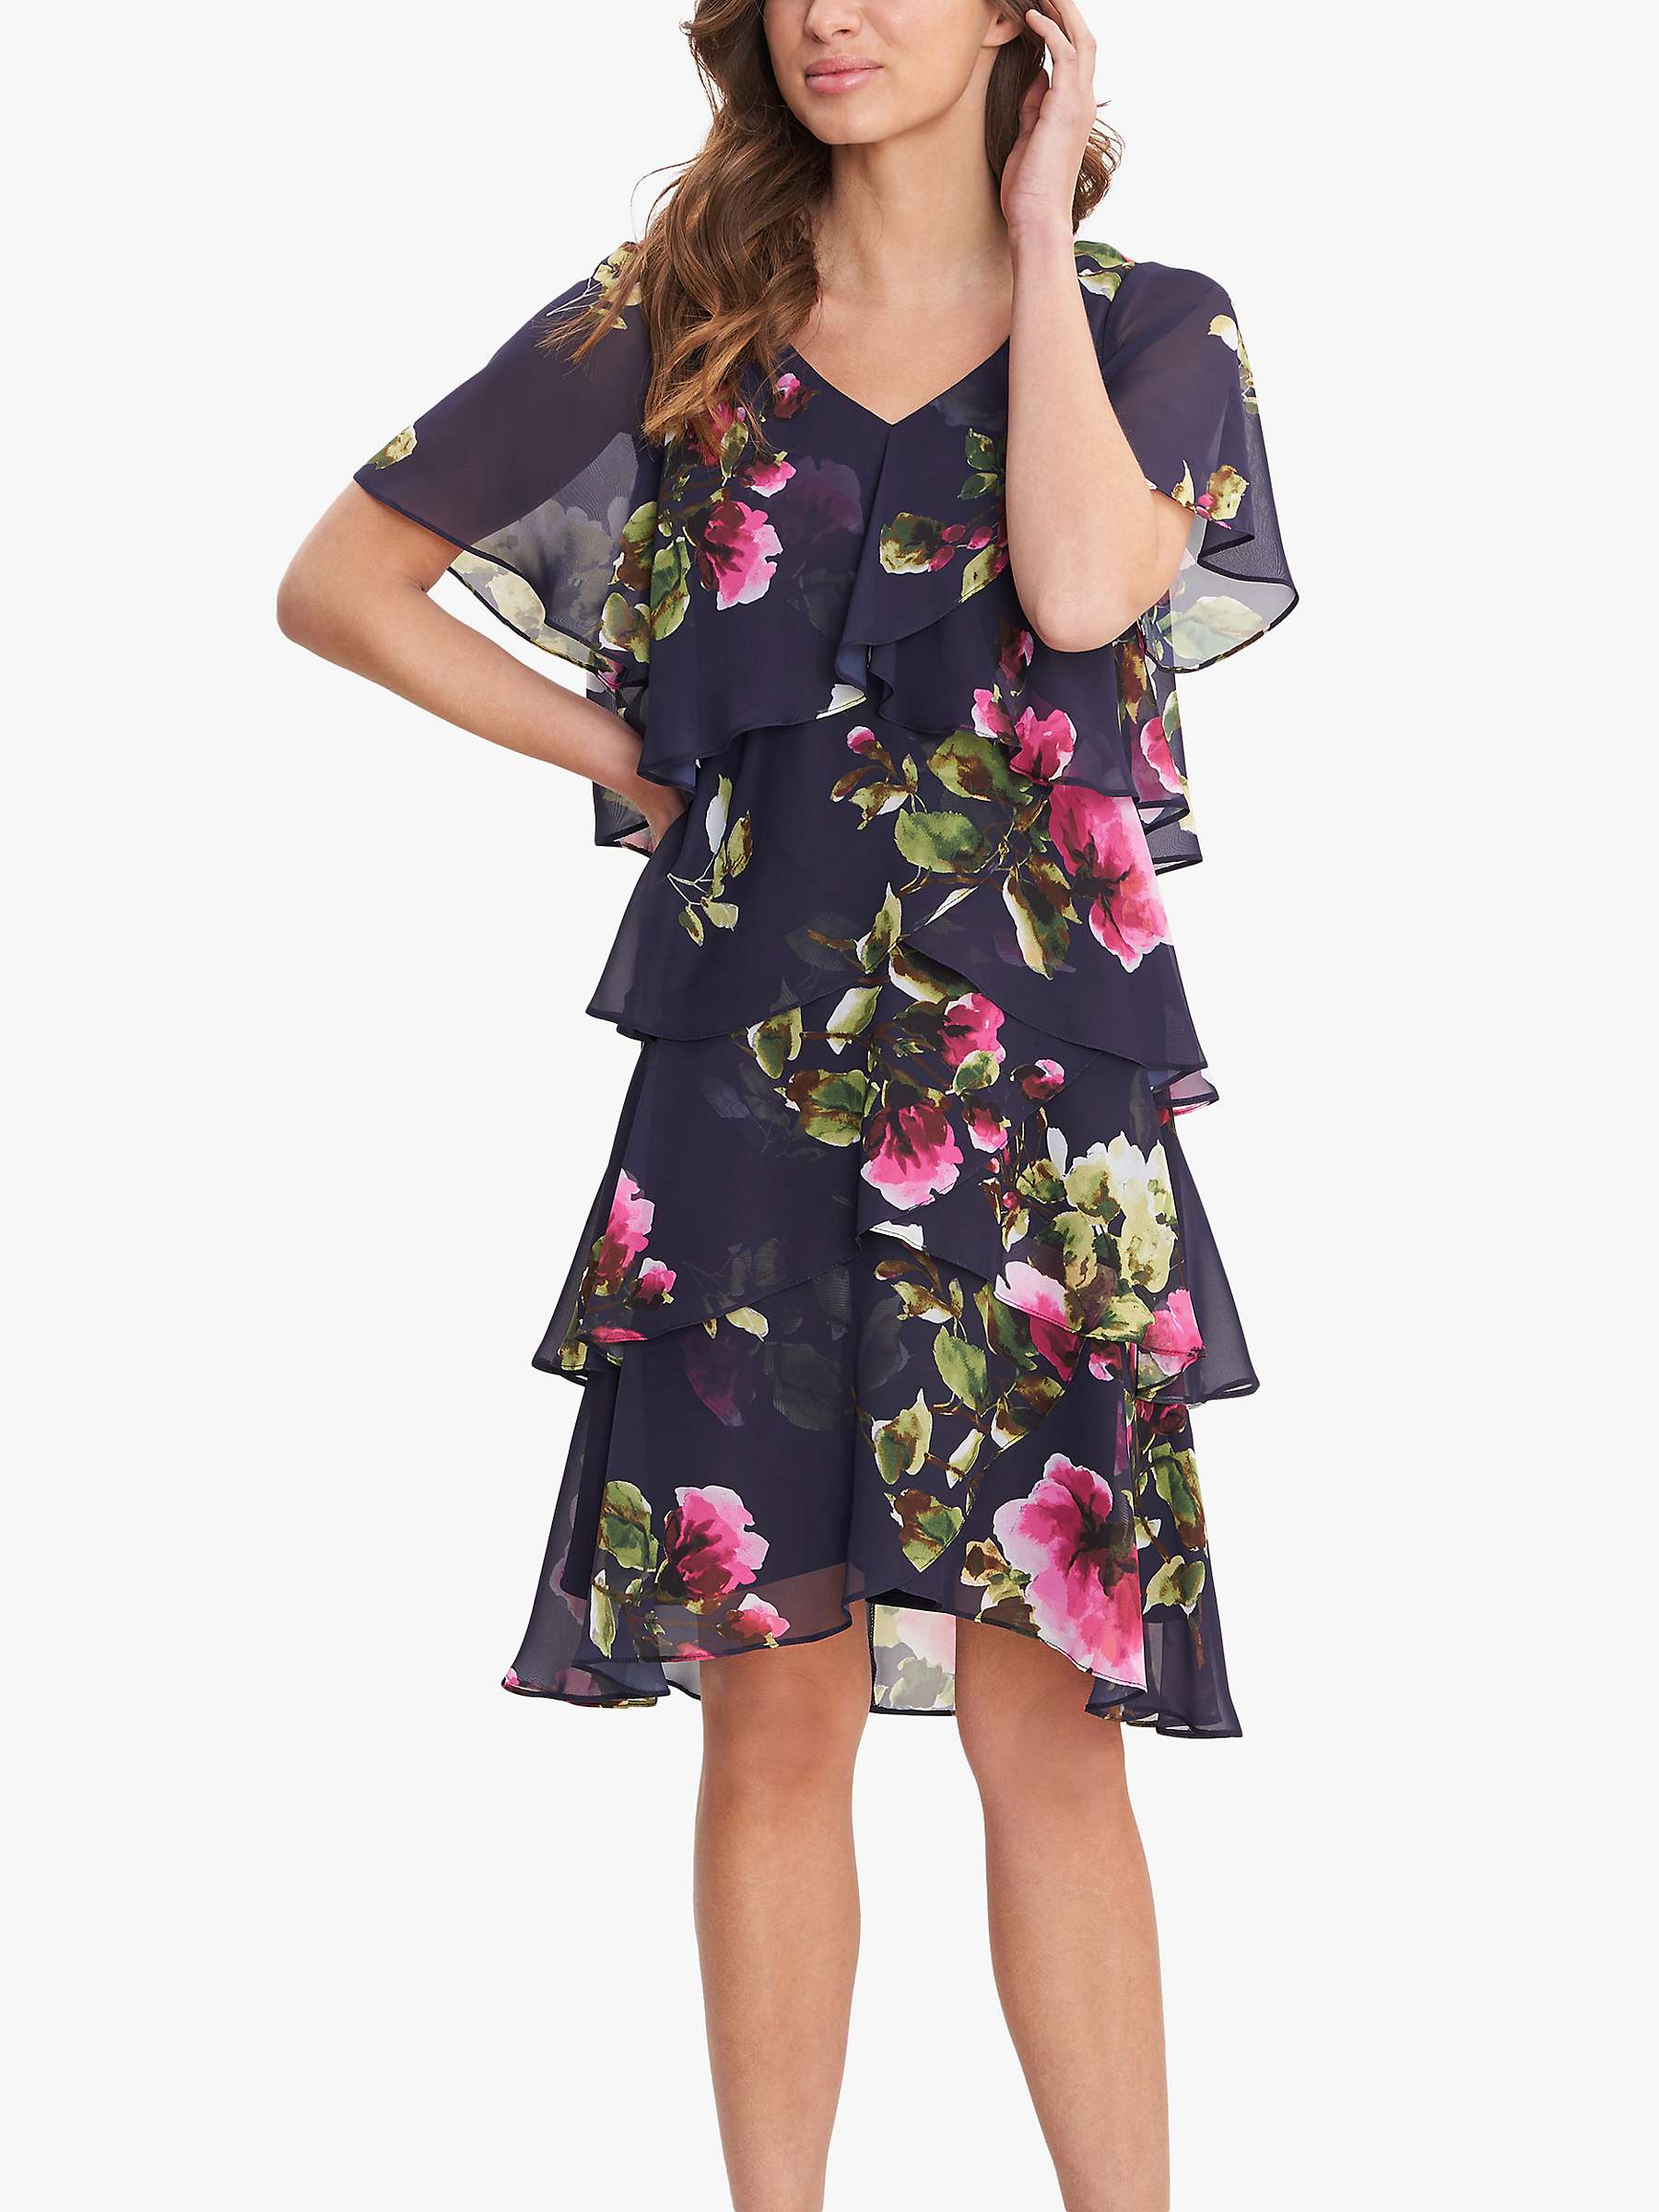 Buy Gina Bacconi Cory Floral Layered Dress, Navy/Multi Online at johnlewis.com